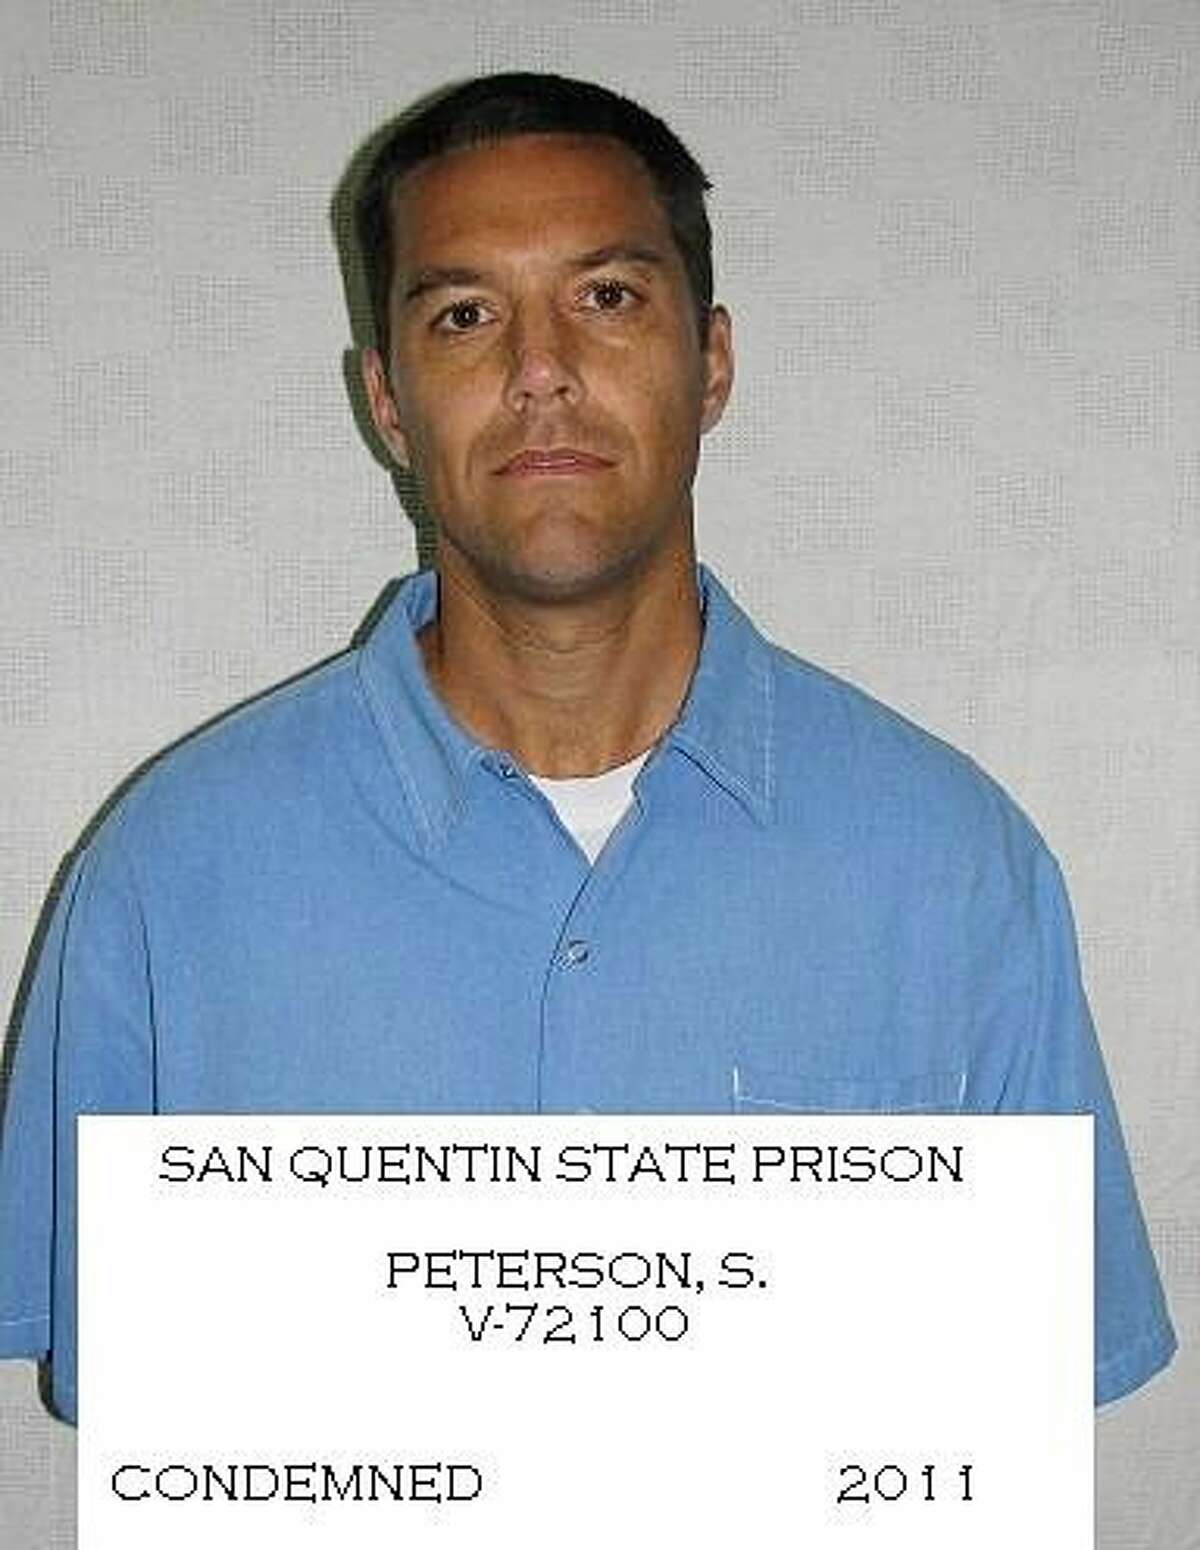 File - Shown in this 2011 file photo released by the California Dept. of Corrections is Scott Peterson who is on death row at San Quentin State Prison. Eight years after he was sentenced to death for the murders of his wife and unborn son, Peterson has filed an automatic appeal to the California Supreme Court. (AP Photo/Calif. Dept. of Corrections, File)